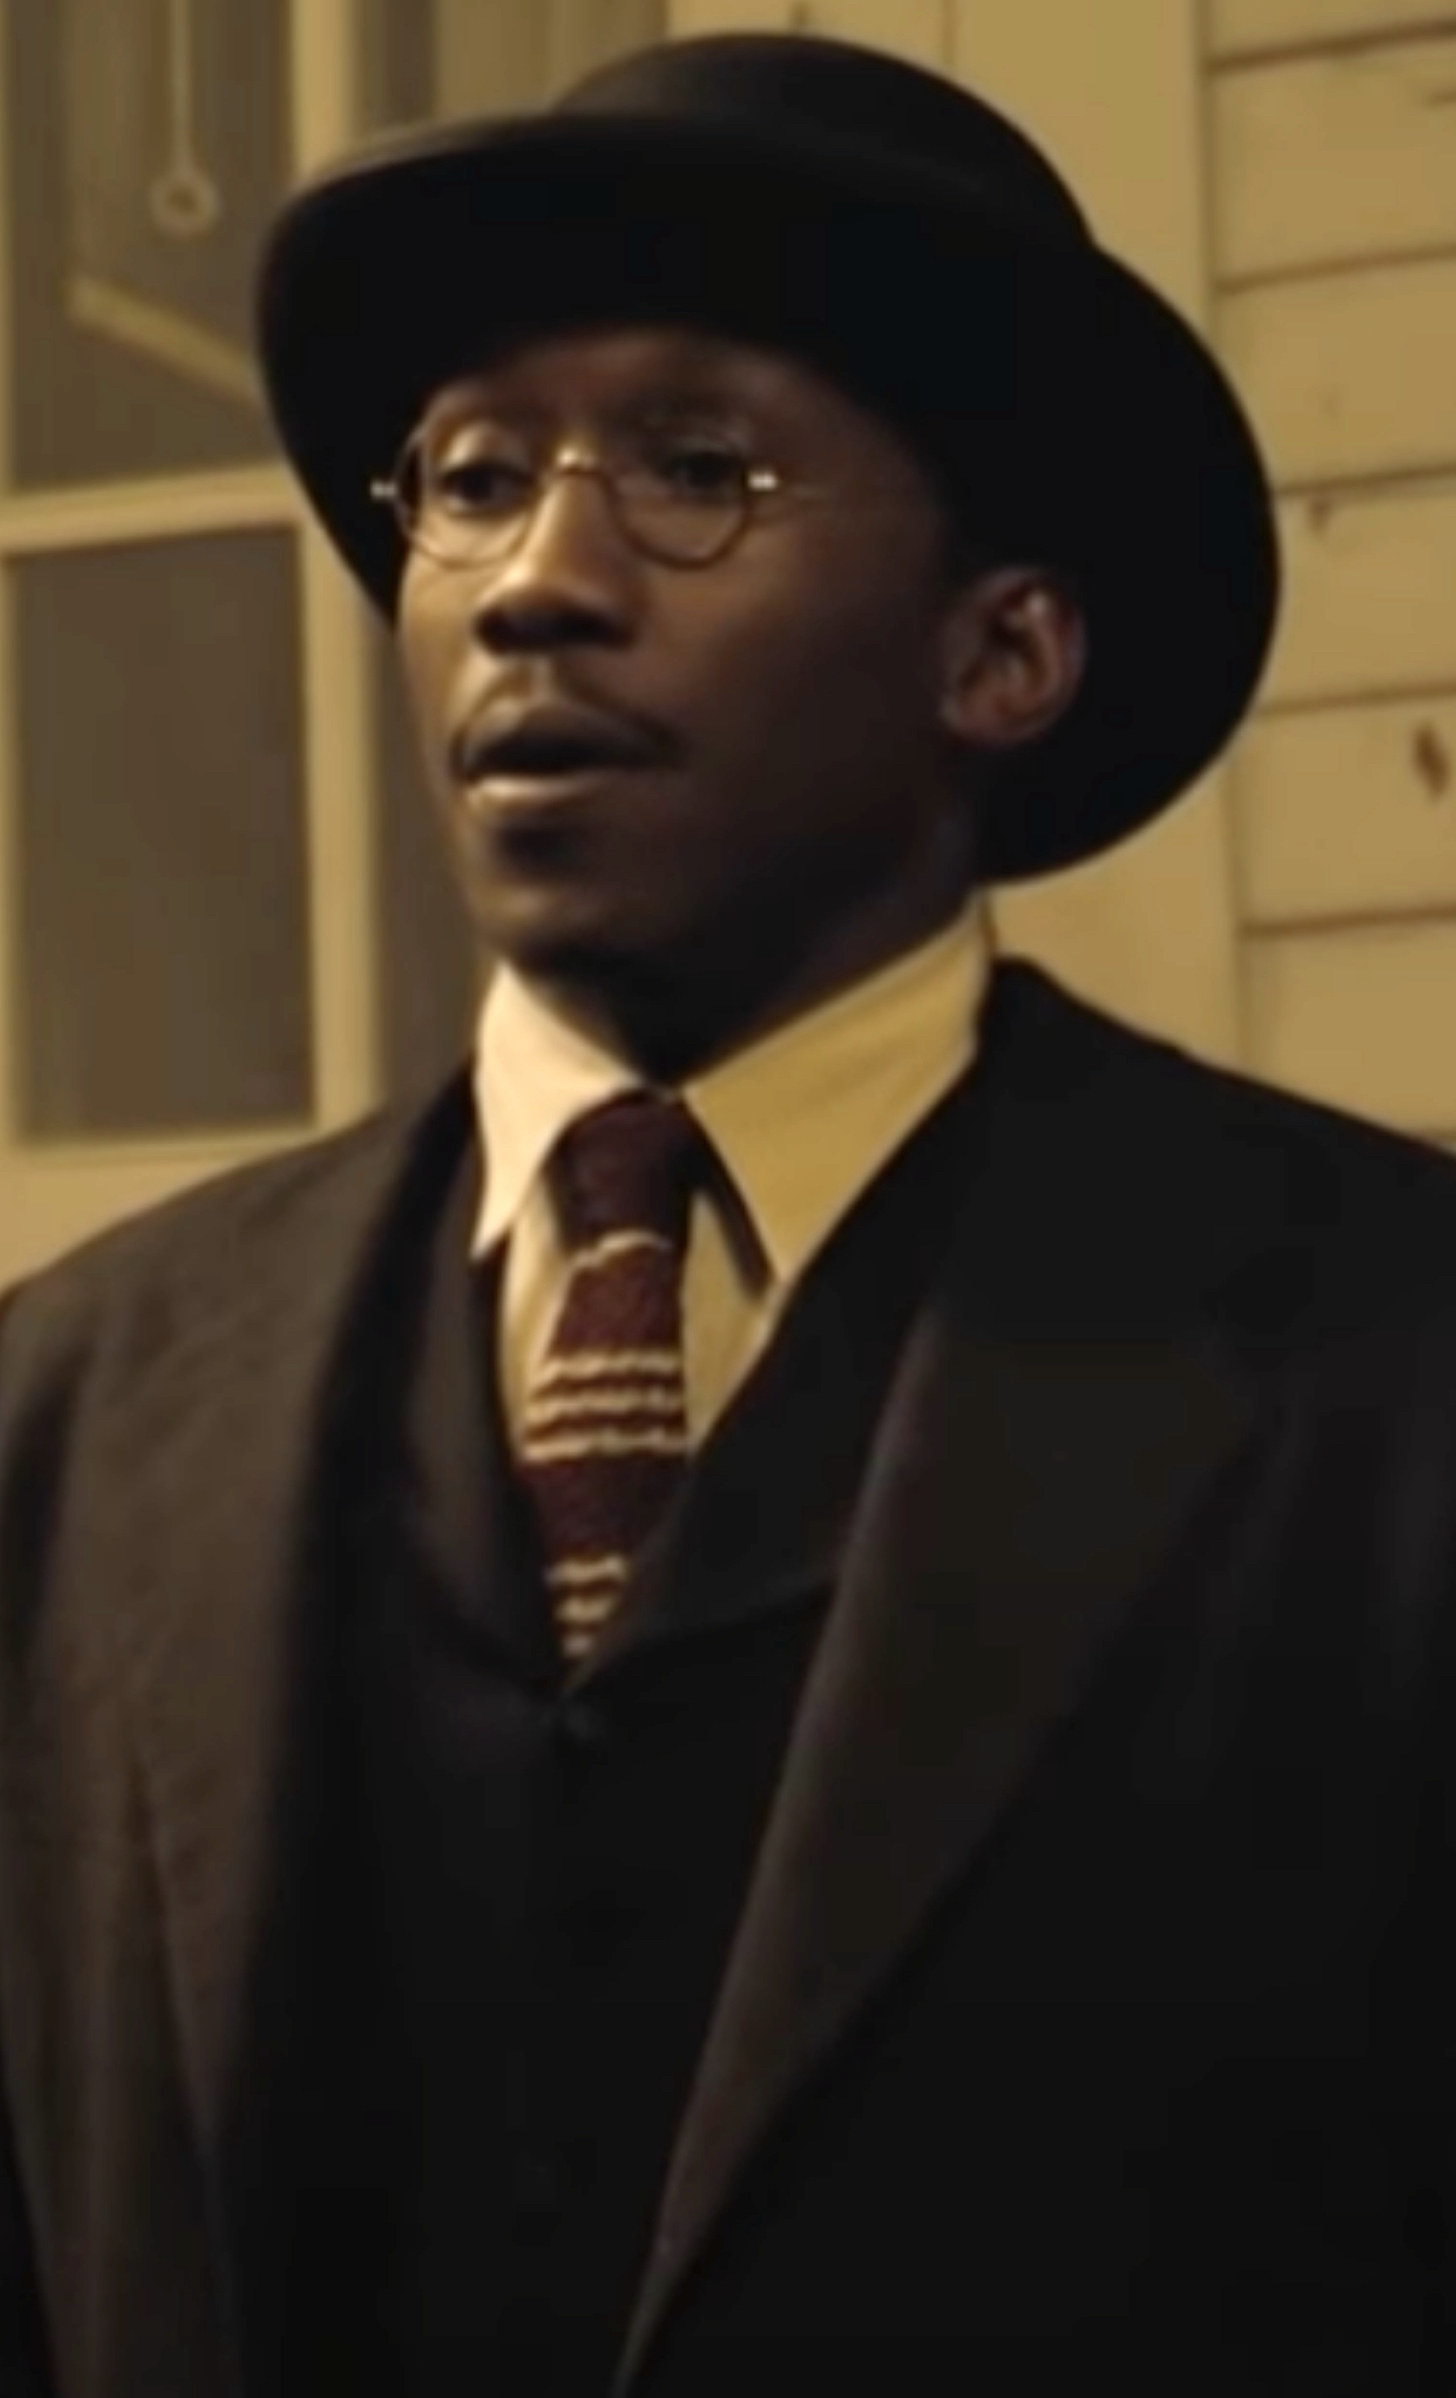 Ali wearing a hat, glasses, and a suit and tie out on the porch